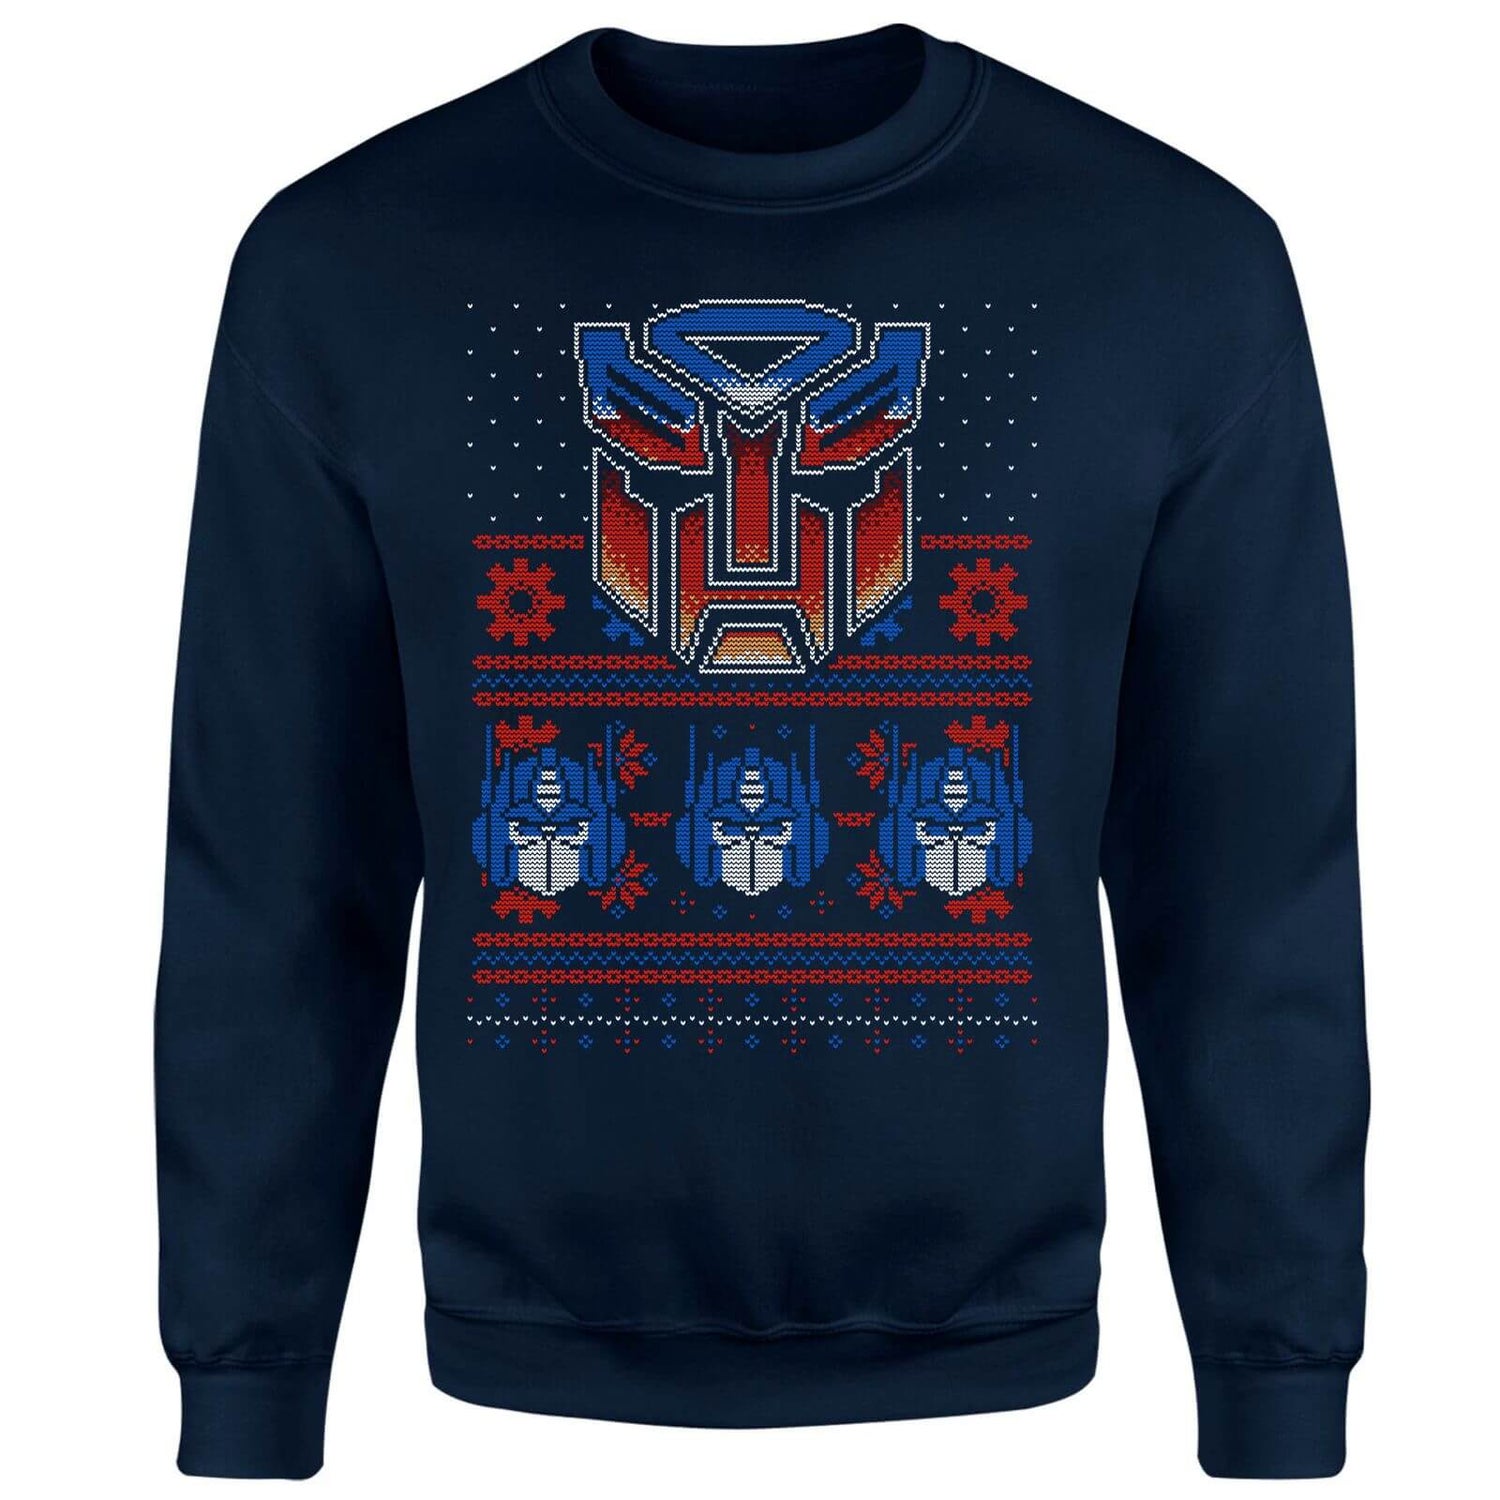 Transformers Christmas Autobots Classic Ugly Knit Unisex Christmas Jumper - Navy